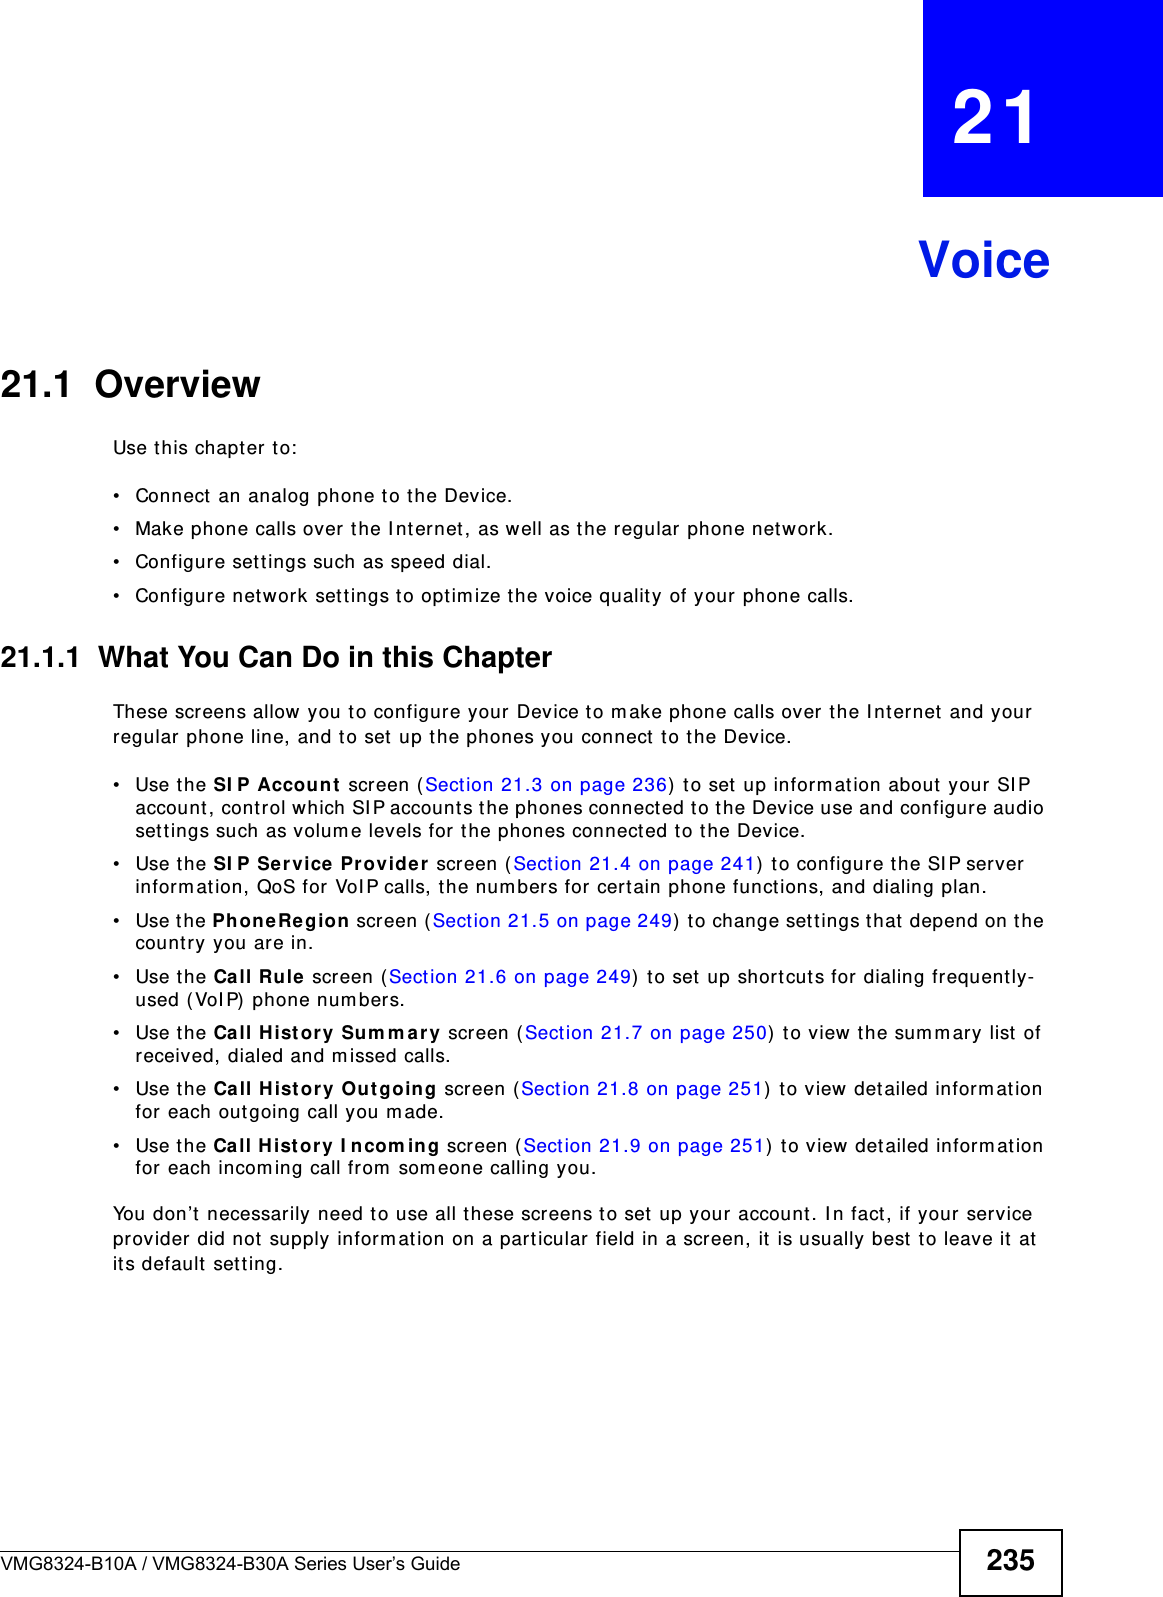 VMG8324-B10A / VMG8324-B30A Series User’s Guide 235CHAPTER   21Voice21.1  OverviewUse t his chapt er to:• Connect  an analog phone t o the Device.• Make phone calls over the I nt ernet, as well as the regular phone network.• Configure sett ings such as speed dial.• Configure network set tings t o opt im ize the voice quality of your phone calls.21.1.1  What You Can Do in this ChapterThese screens allow you to configure your Device t o m ake phone calls over the I nt ernet and your regular phone line, and to set  up the phones you connect to the Device.• Use the SI P Account  screen ( Sect ion 21.3 on page 236) to set  up informat ion about your SI P account , cont rol which SI P accounts t he phones connected t o the Device use and configure audio set tings such as volum e levels for the phones connect ed t o t he Device.• Use the SI P Ser vice  Pr ovide r screen ( Section 21.4 on page 241)  to configure the SI P server inform at ion, QoS for VoI P calls, t he num bers for certain phone funct ions, and dialing plan. • Use the PhoneRe gion screen ( Section 21.5 on page 249)  t o change set tings t hat  depend on t he country you are in.• Use the Call Rule  screen ( Sect ion 21.6 on page 249)  t o set up shortcut s for dialing frequently-used ( VoI P)  phone num bers.• Use the Call H ist or y Sum m a r y screen ( Sect ion 21.7 on page 250)  t o view the sum m ary list of received, dialed and m issed calls.• Use the Call H ist or y Ou t going screen ( Sect ion 21.8 on page 251)  t o view det ailed inform at ion for each out going call you m ade.• Use the Call Hist or y I ncom in g screen ( Sect ion 21.9 on page 251)  to view detailed inform ation for each incom ing call from  som eone calling you.You don’t necessarily need t o use all these screens t o set up your account. I n fact, if your service provider did not supply inform ation on a part icular field in a screen, it  is usually best  t o leave it at it s default  sett ing.